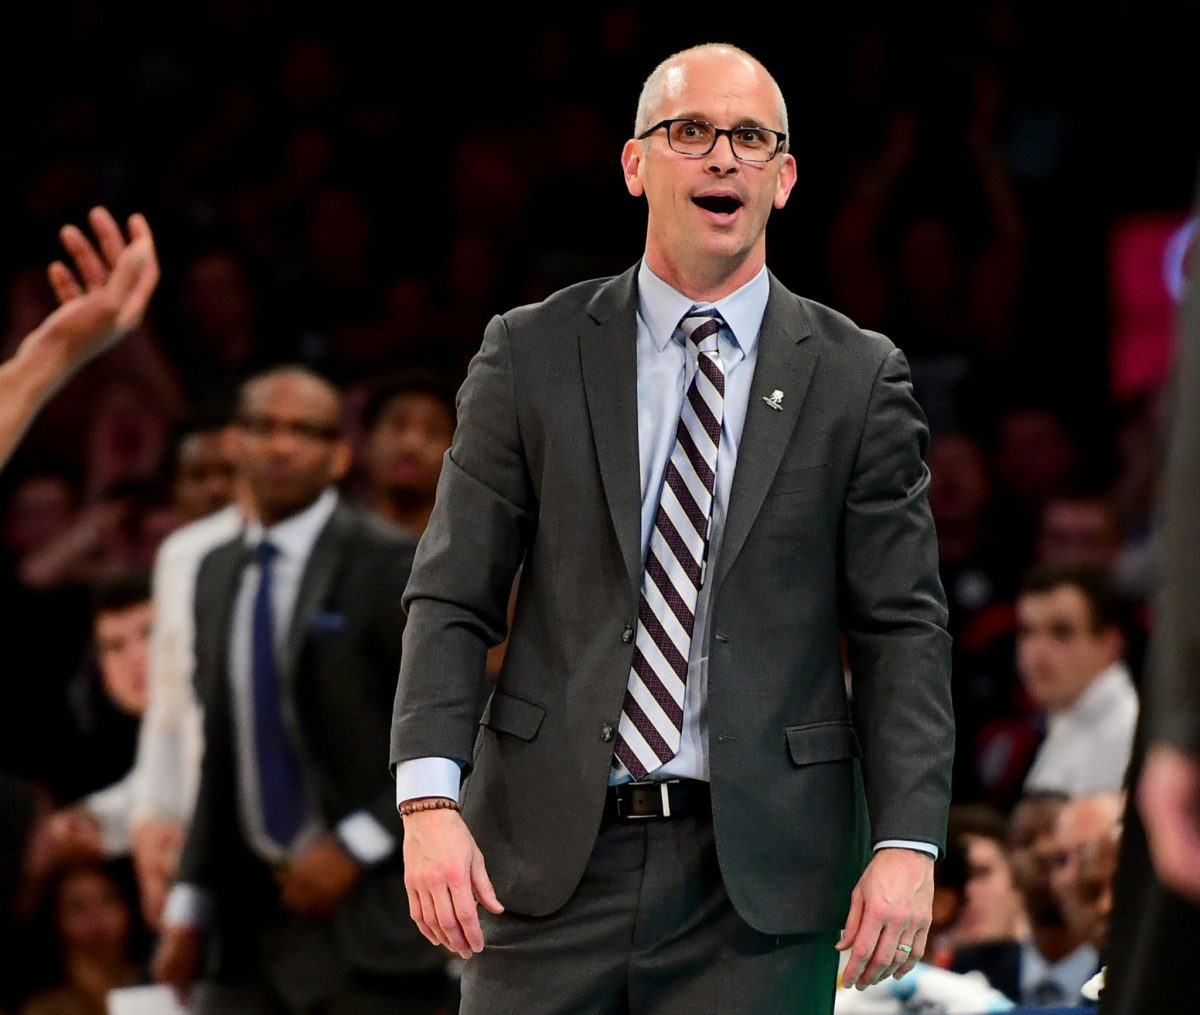 Dan Hurley reacting to being ejected.